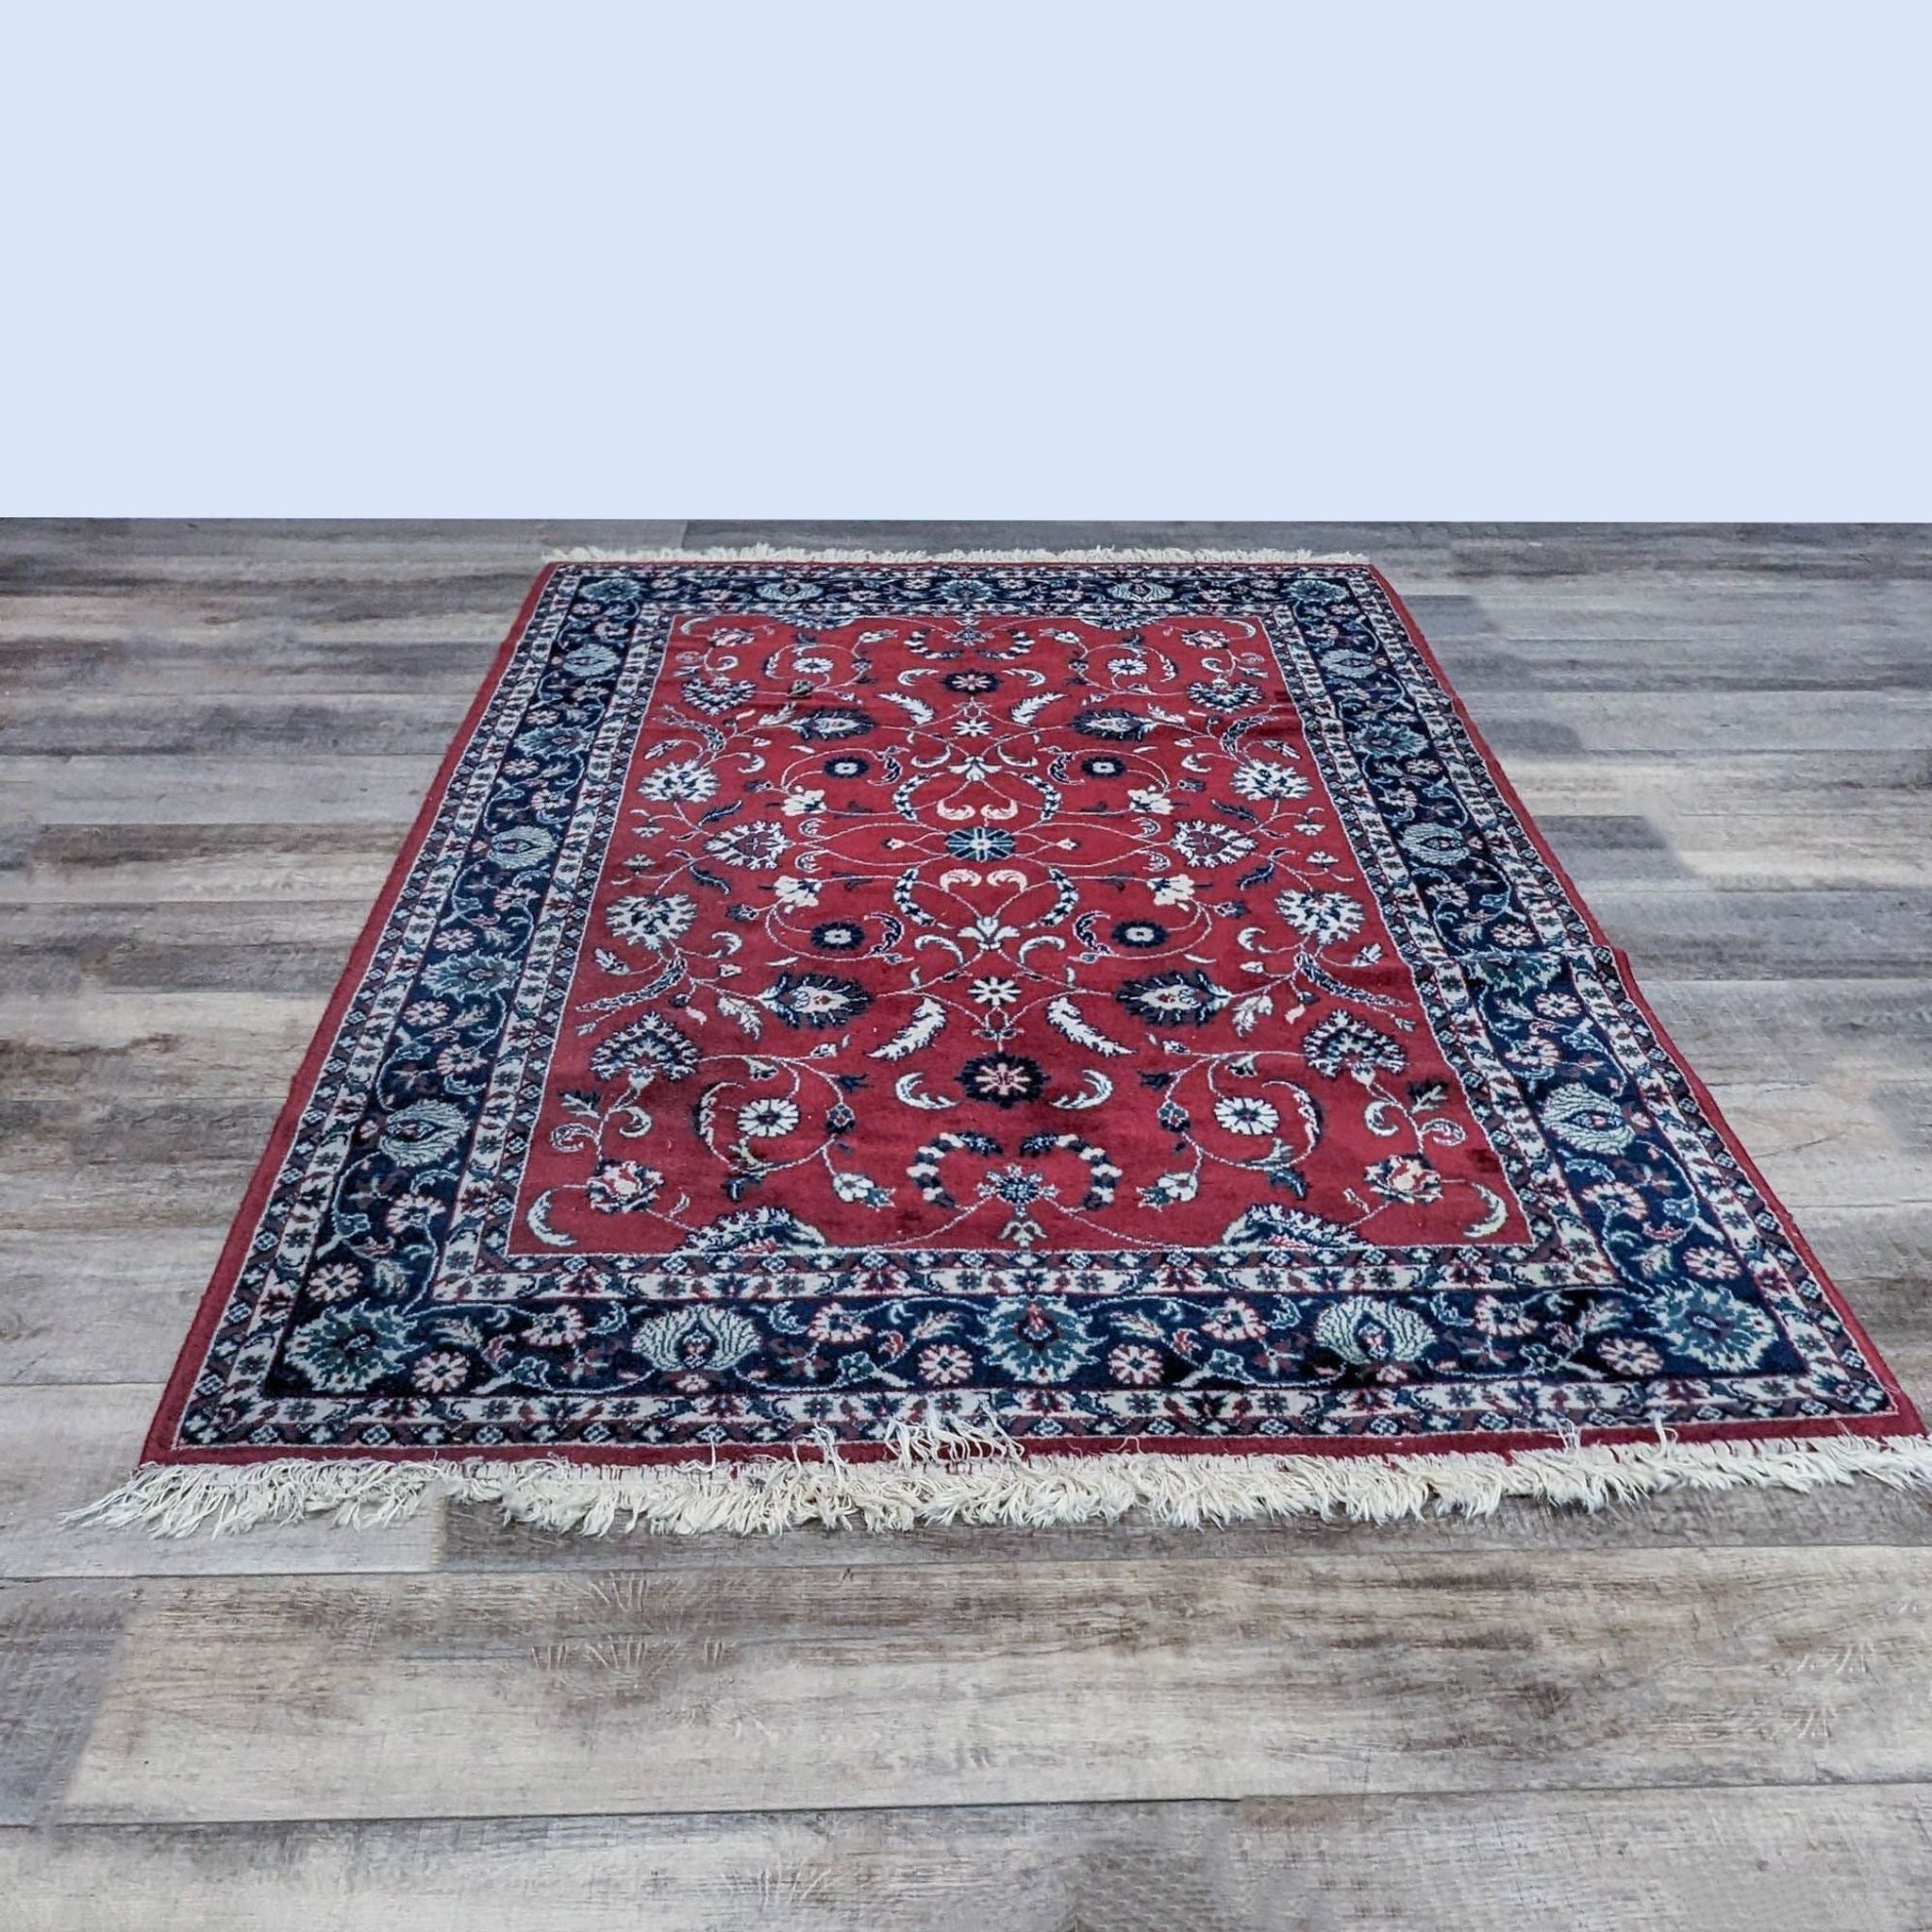 5' 7" x 8' 4" Reperch oriental wool area rug with red central field and intricate blue patterns, displayed on a wooden floor.